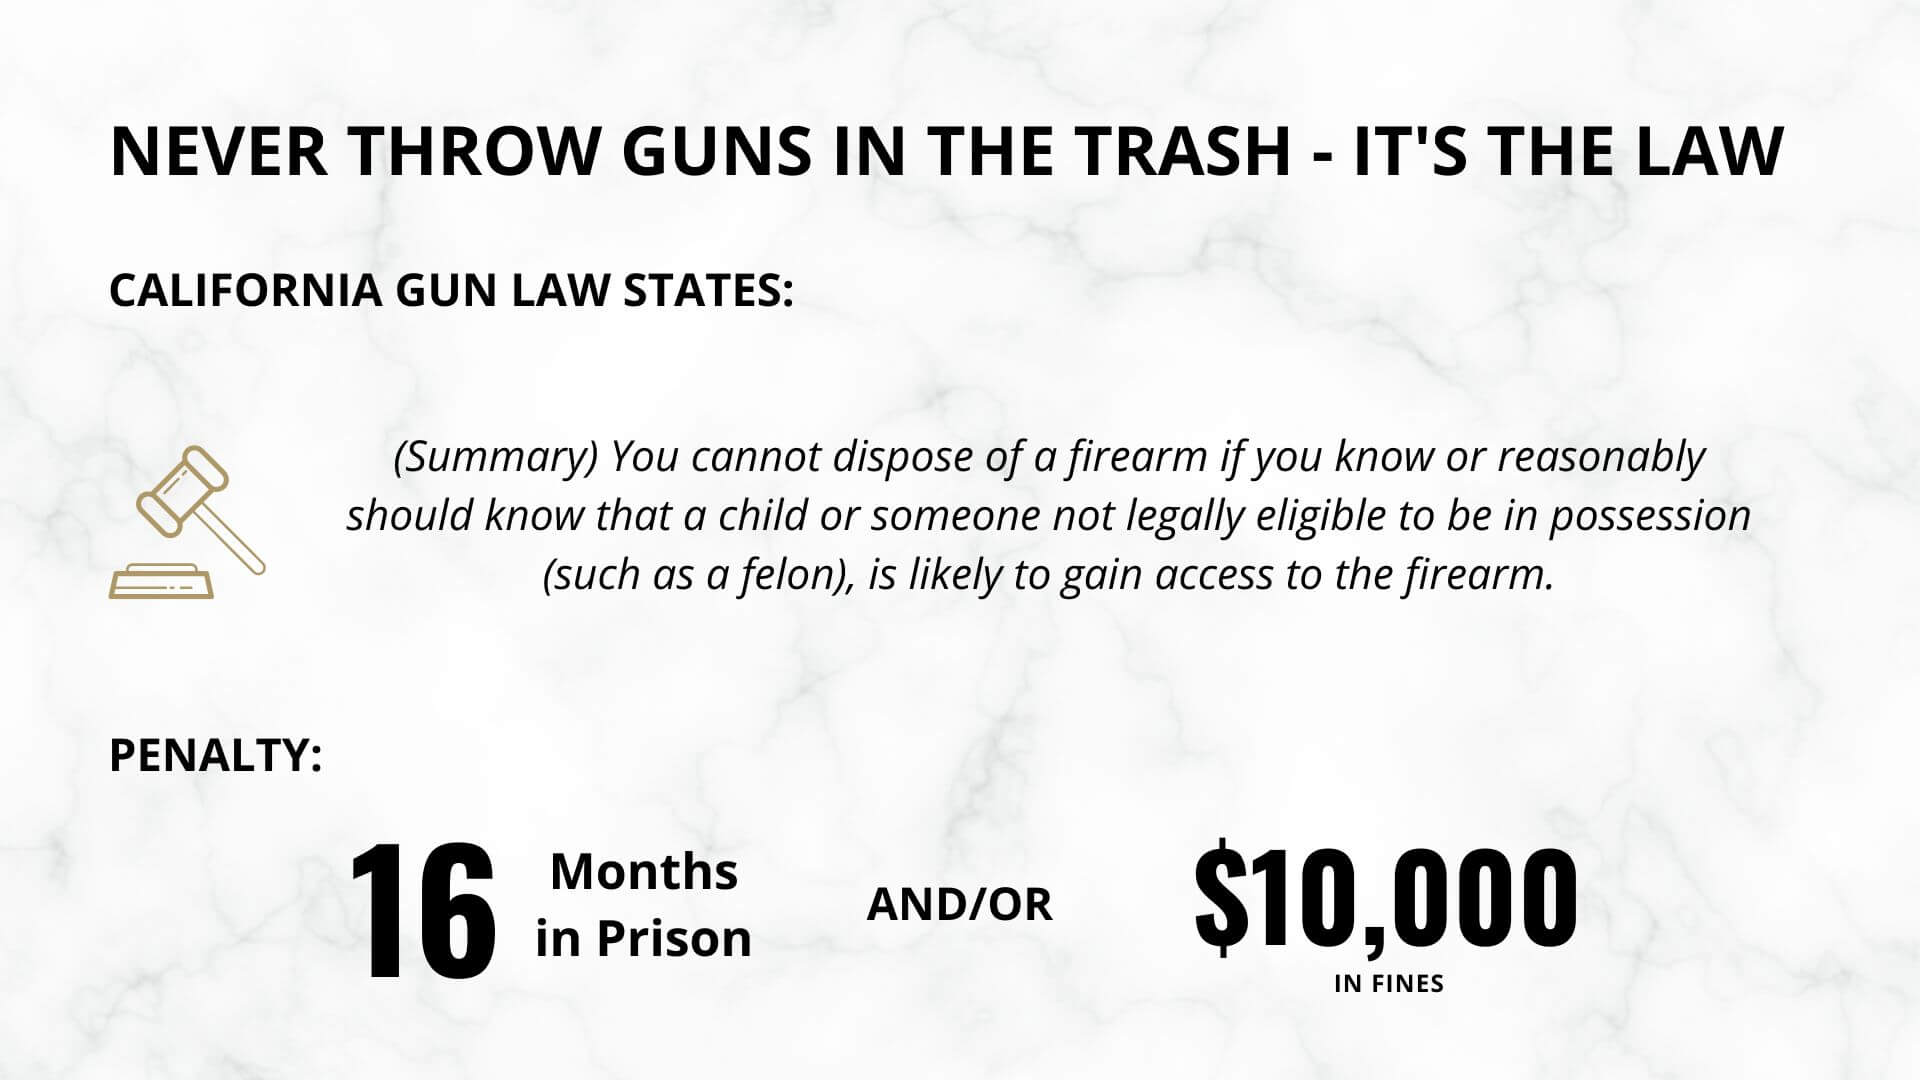 never throw guns in the trash - it's the law. California Gun law States: (Summary) You cannot dispose of a firearm if you know or reasonably should know that a child or someone not legally eligible to be in possession (such as a felon), is likely to gain access to the firearm. penalty is 16 months in prison and/or $10,000 in fines